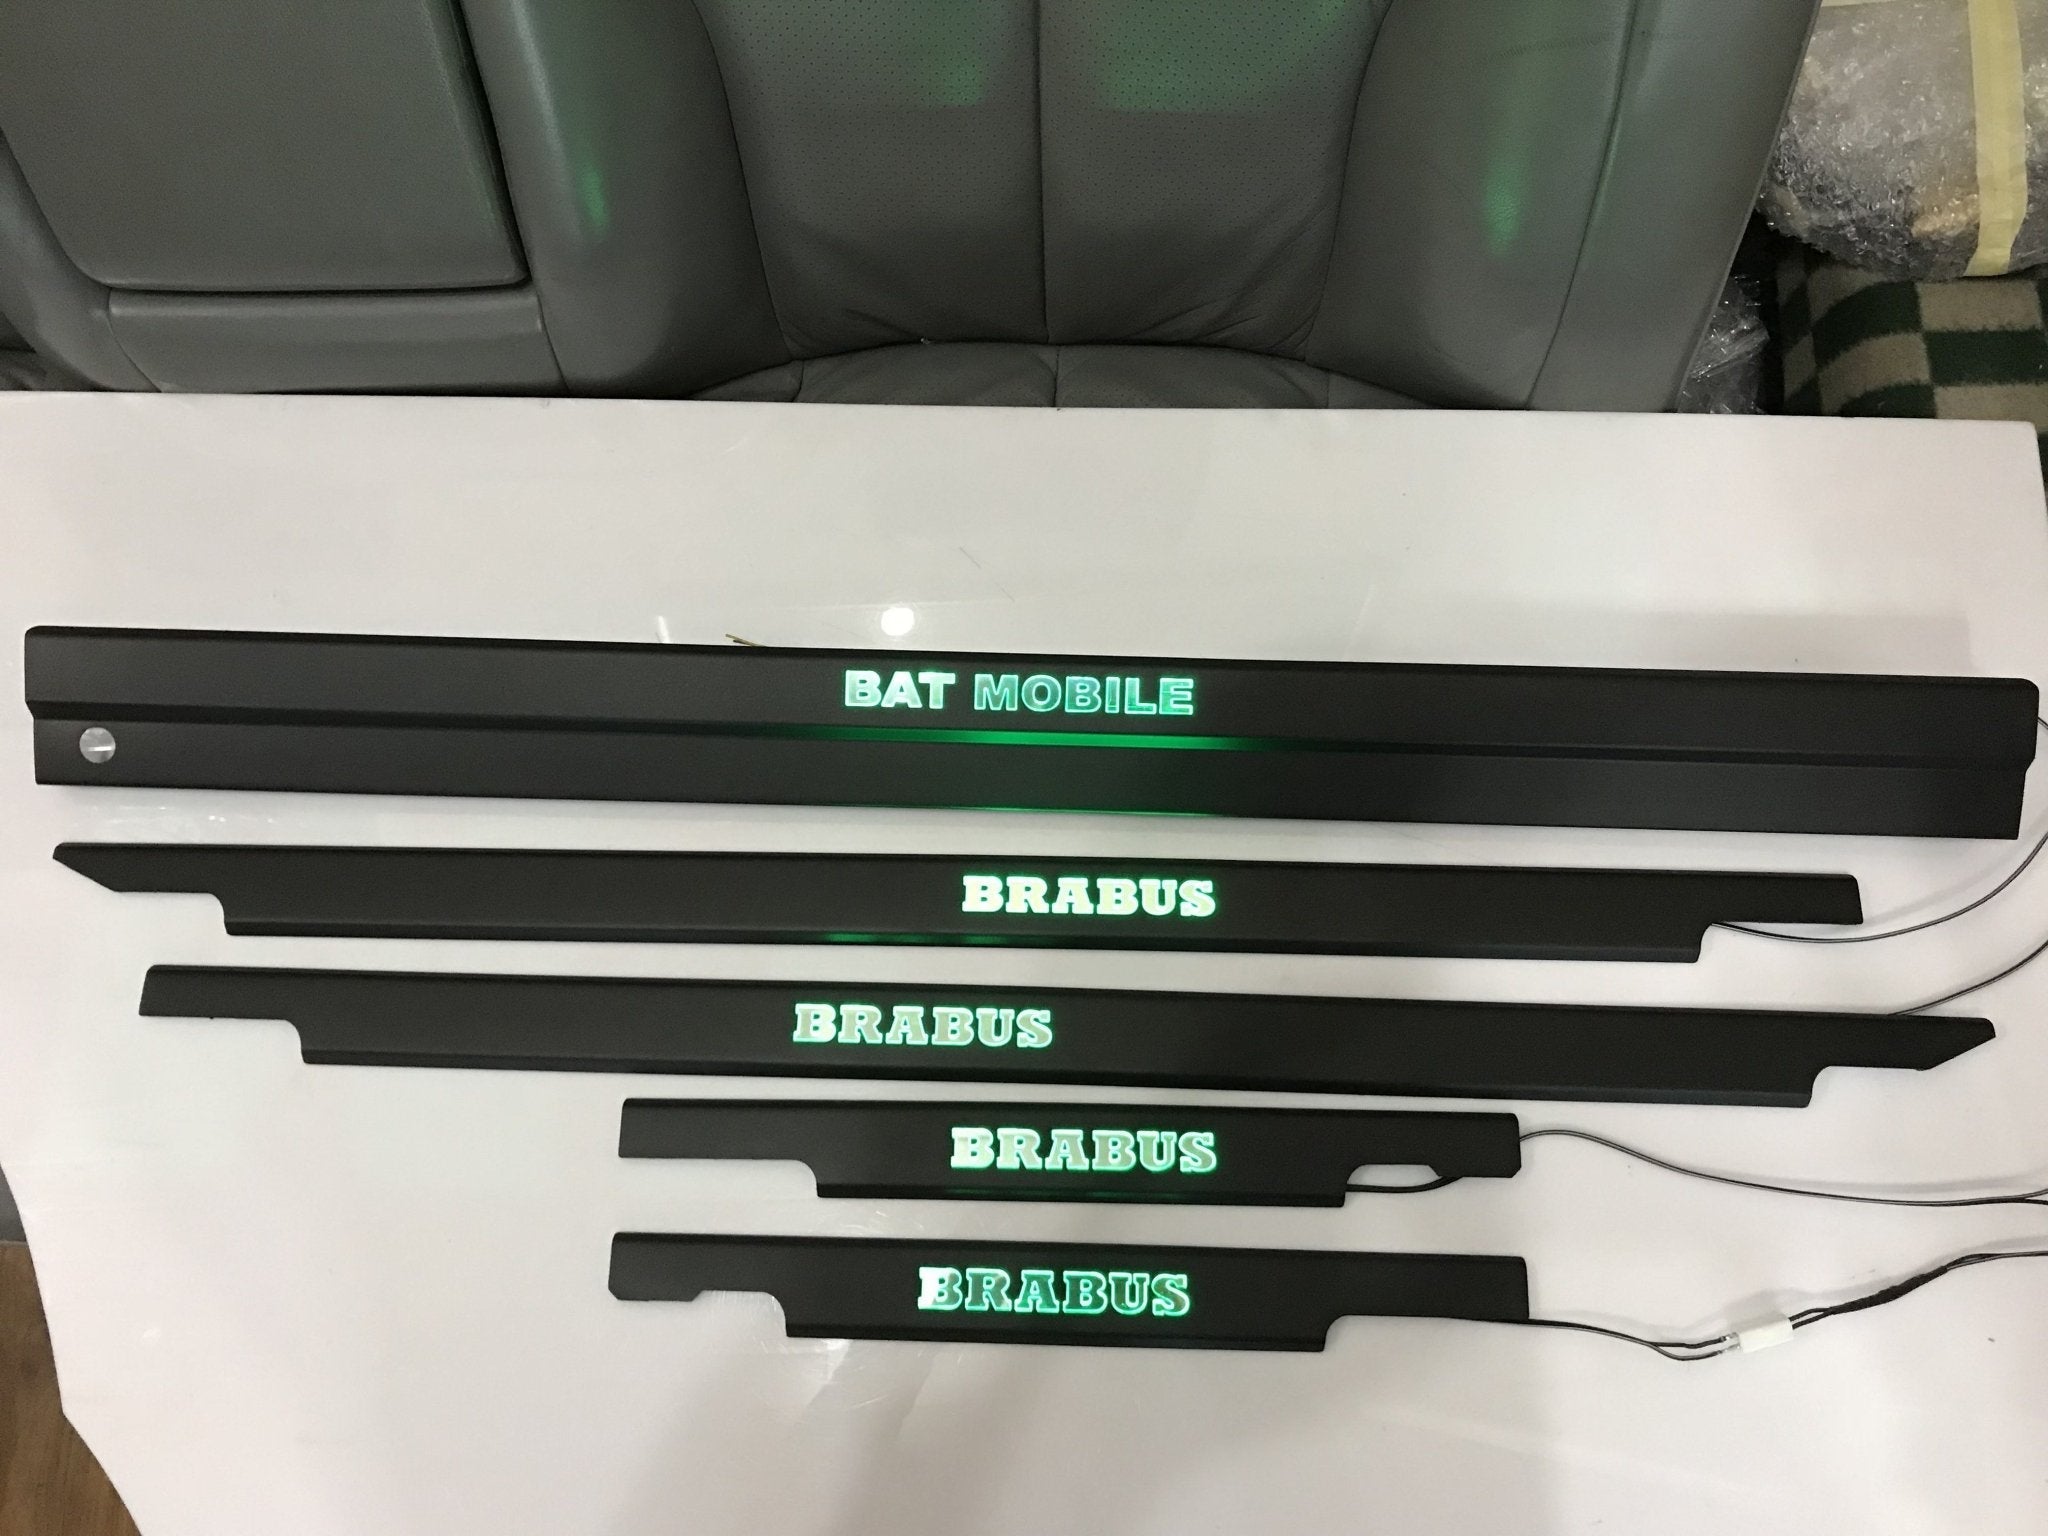 Bat Mobile Brabus LED Illuminated Door Sills 4 or 5 pcs for Mercedes-Benz G-Class W463